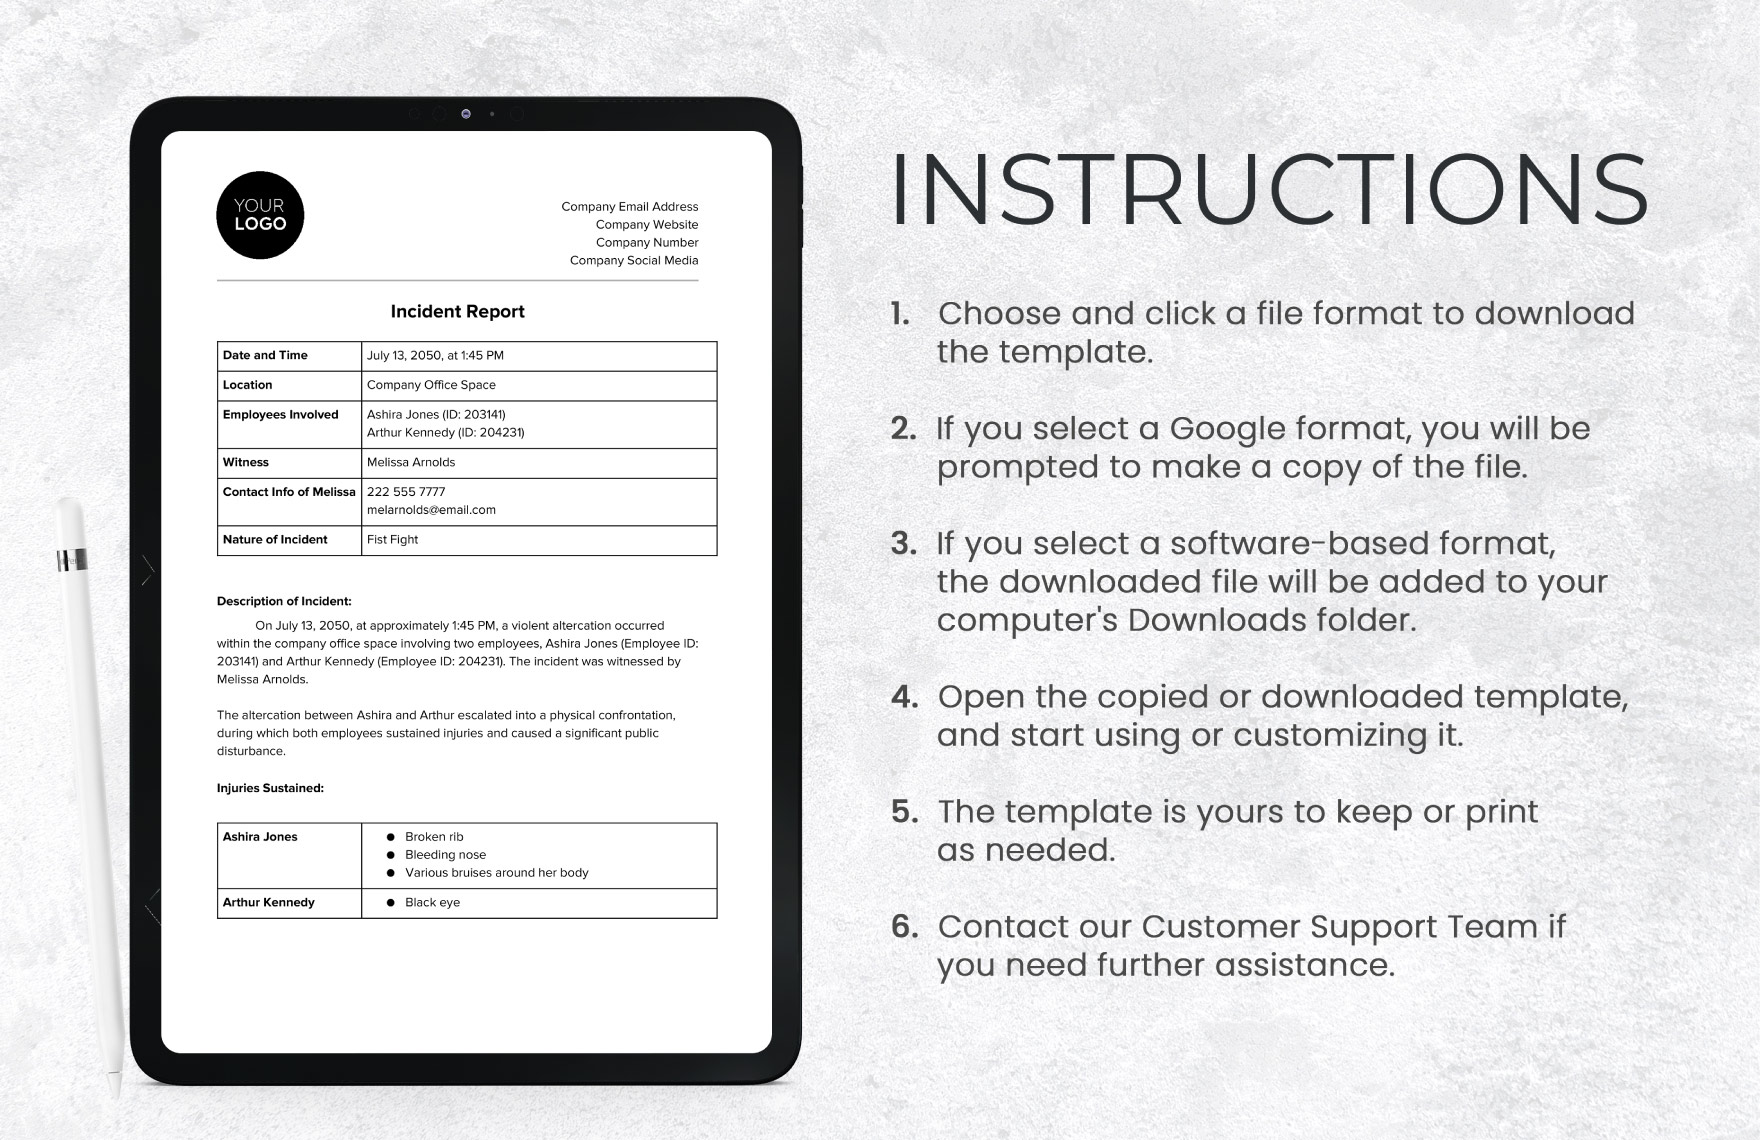 Incident Report HR Template